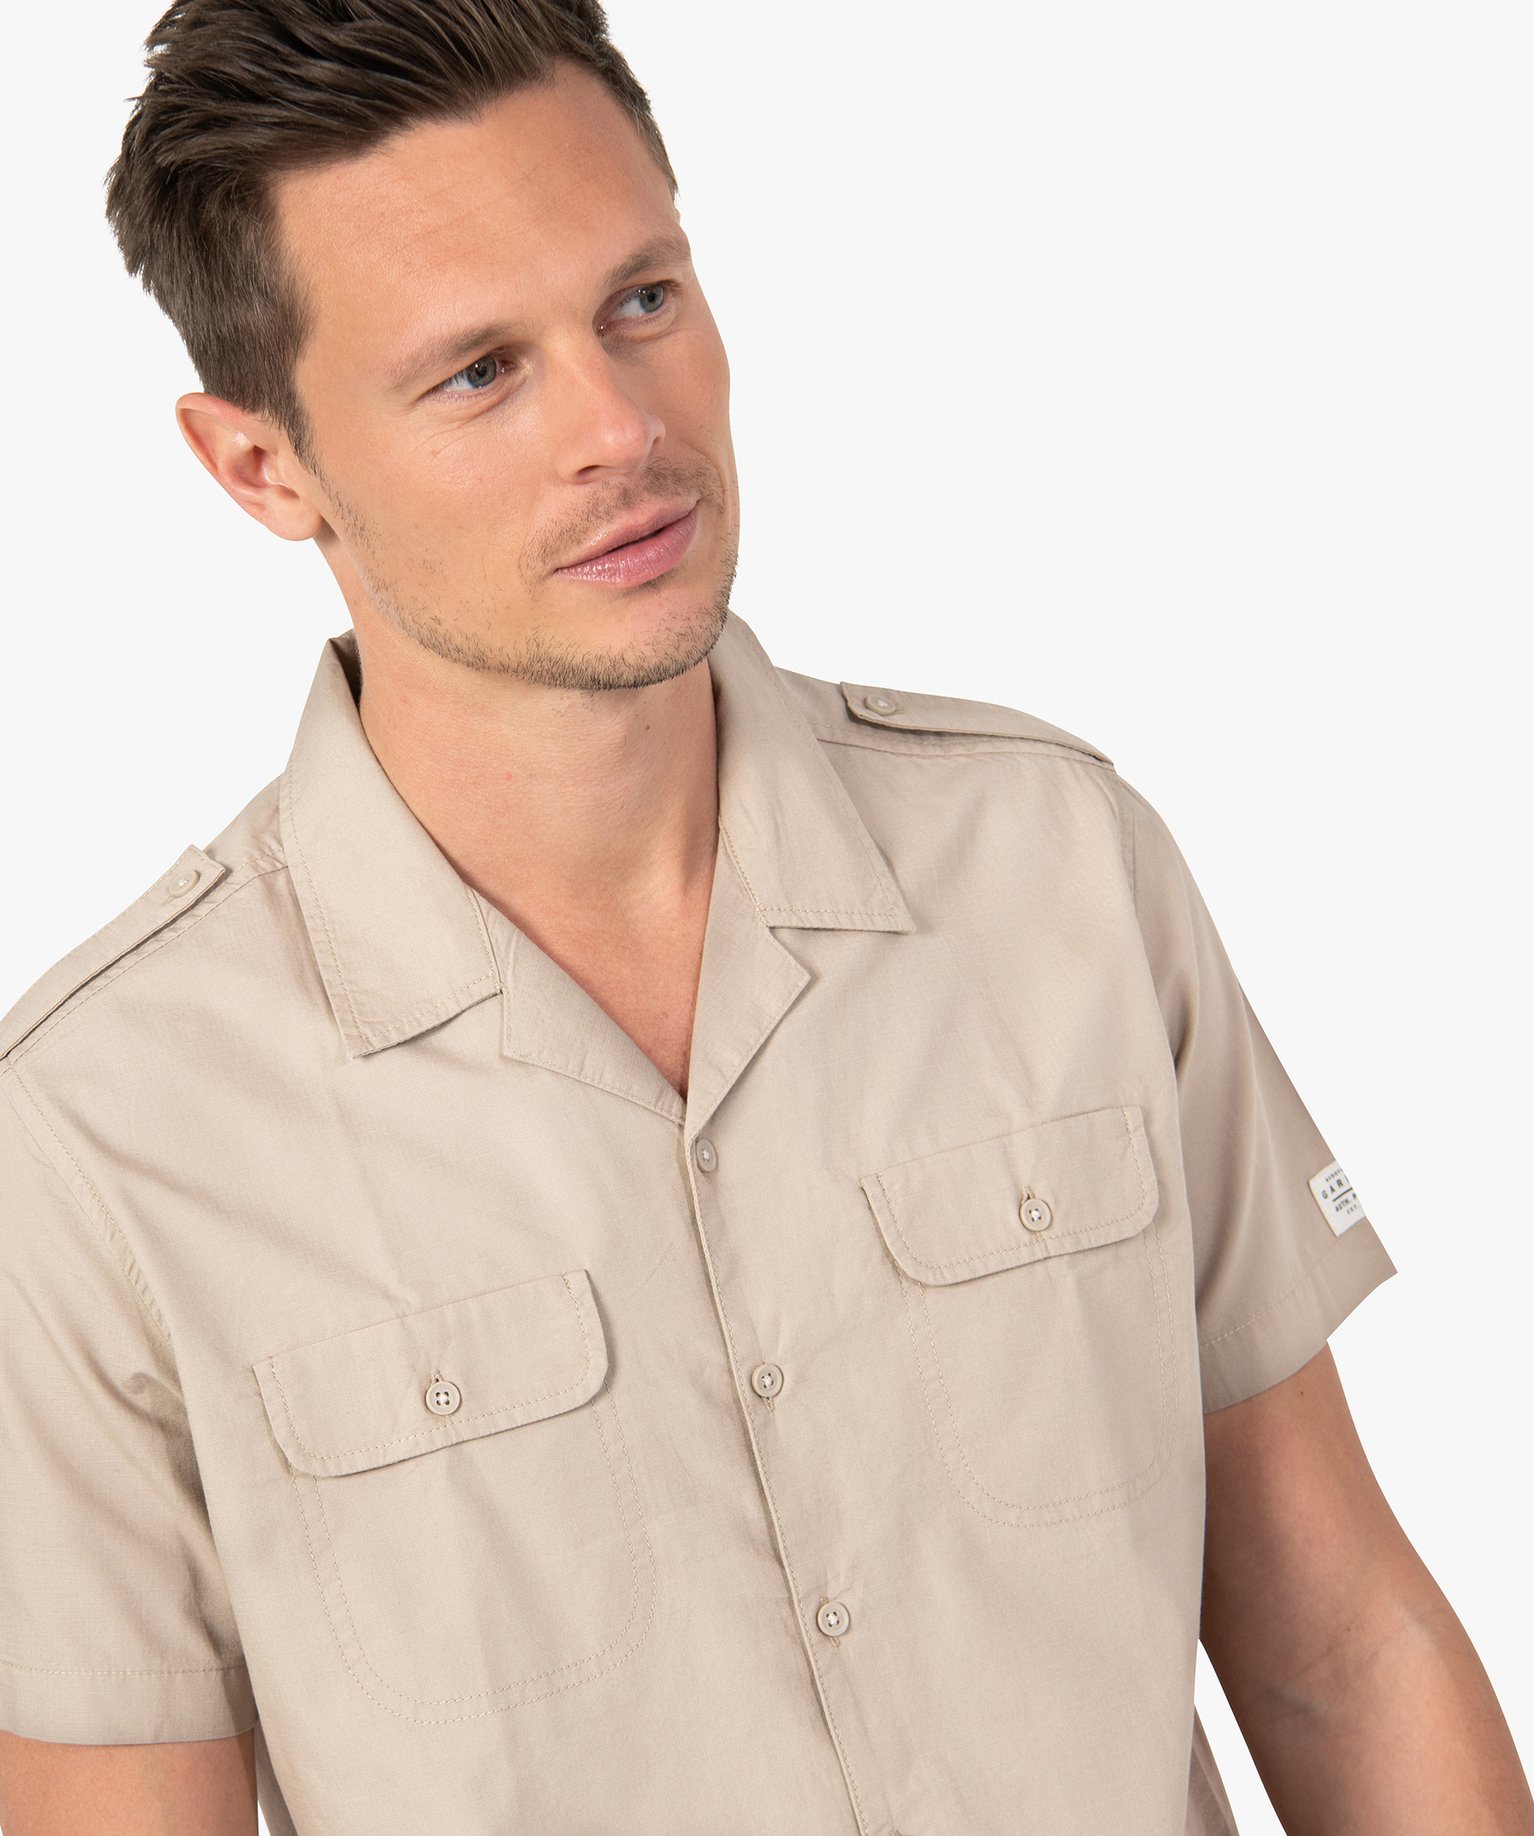 chemise homme a manches courtes saharienne beige chemise manches